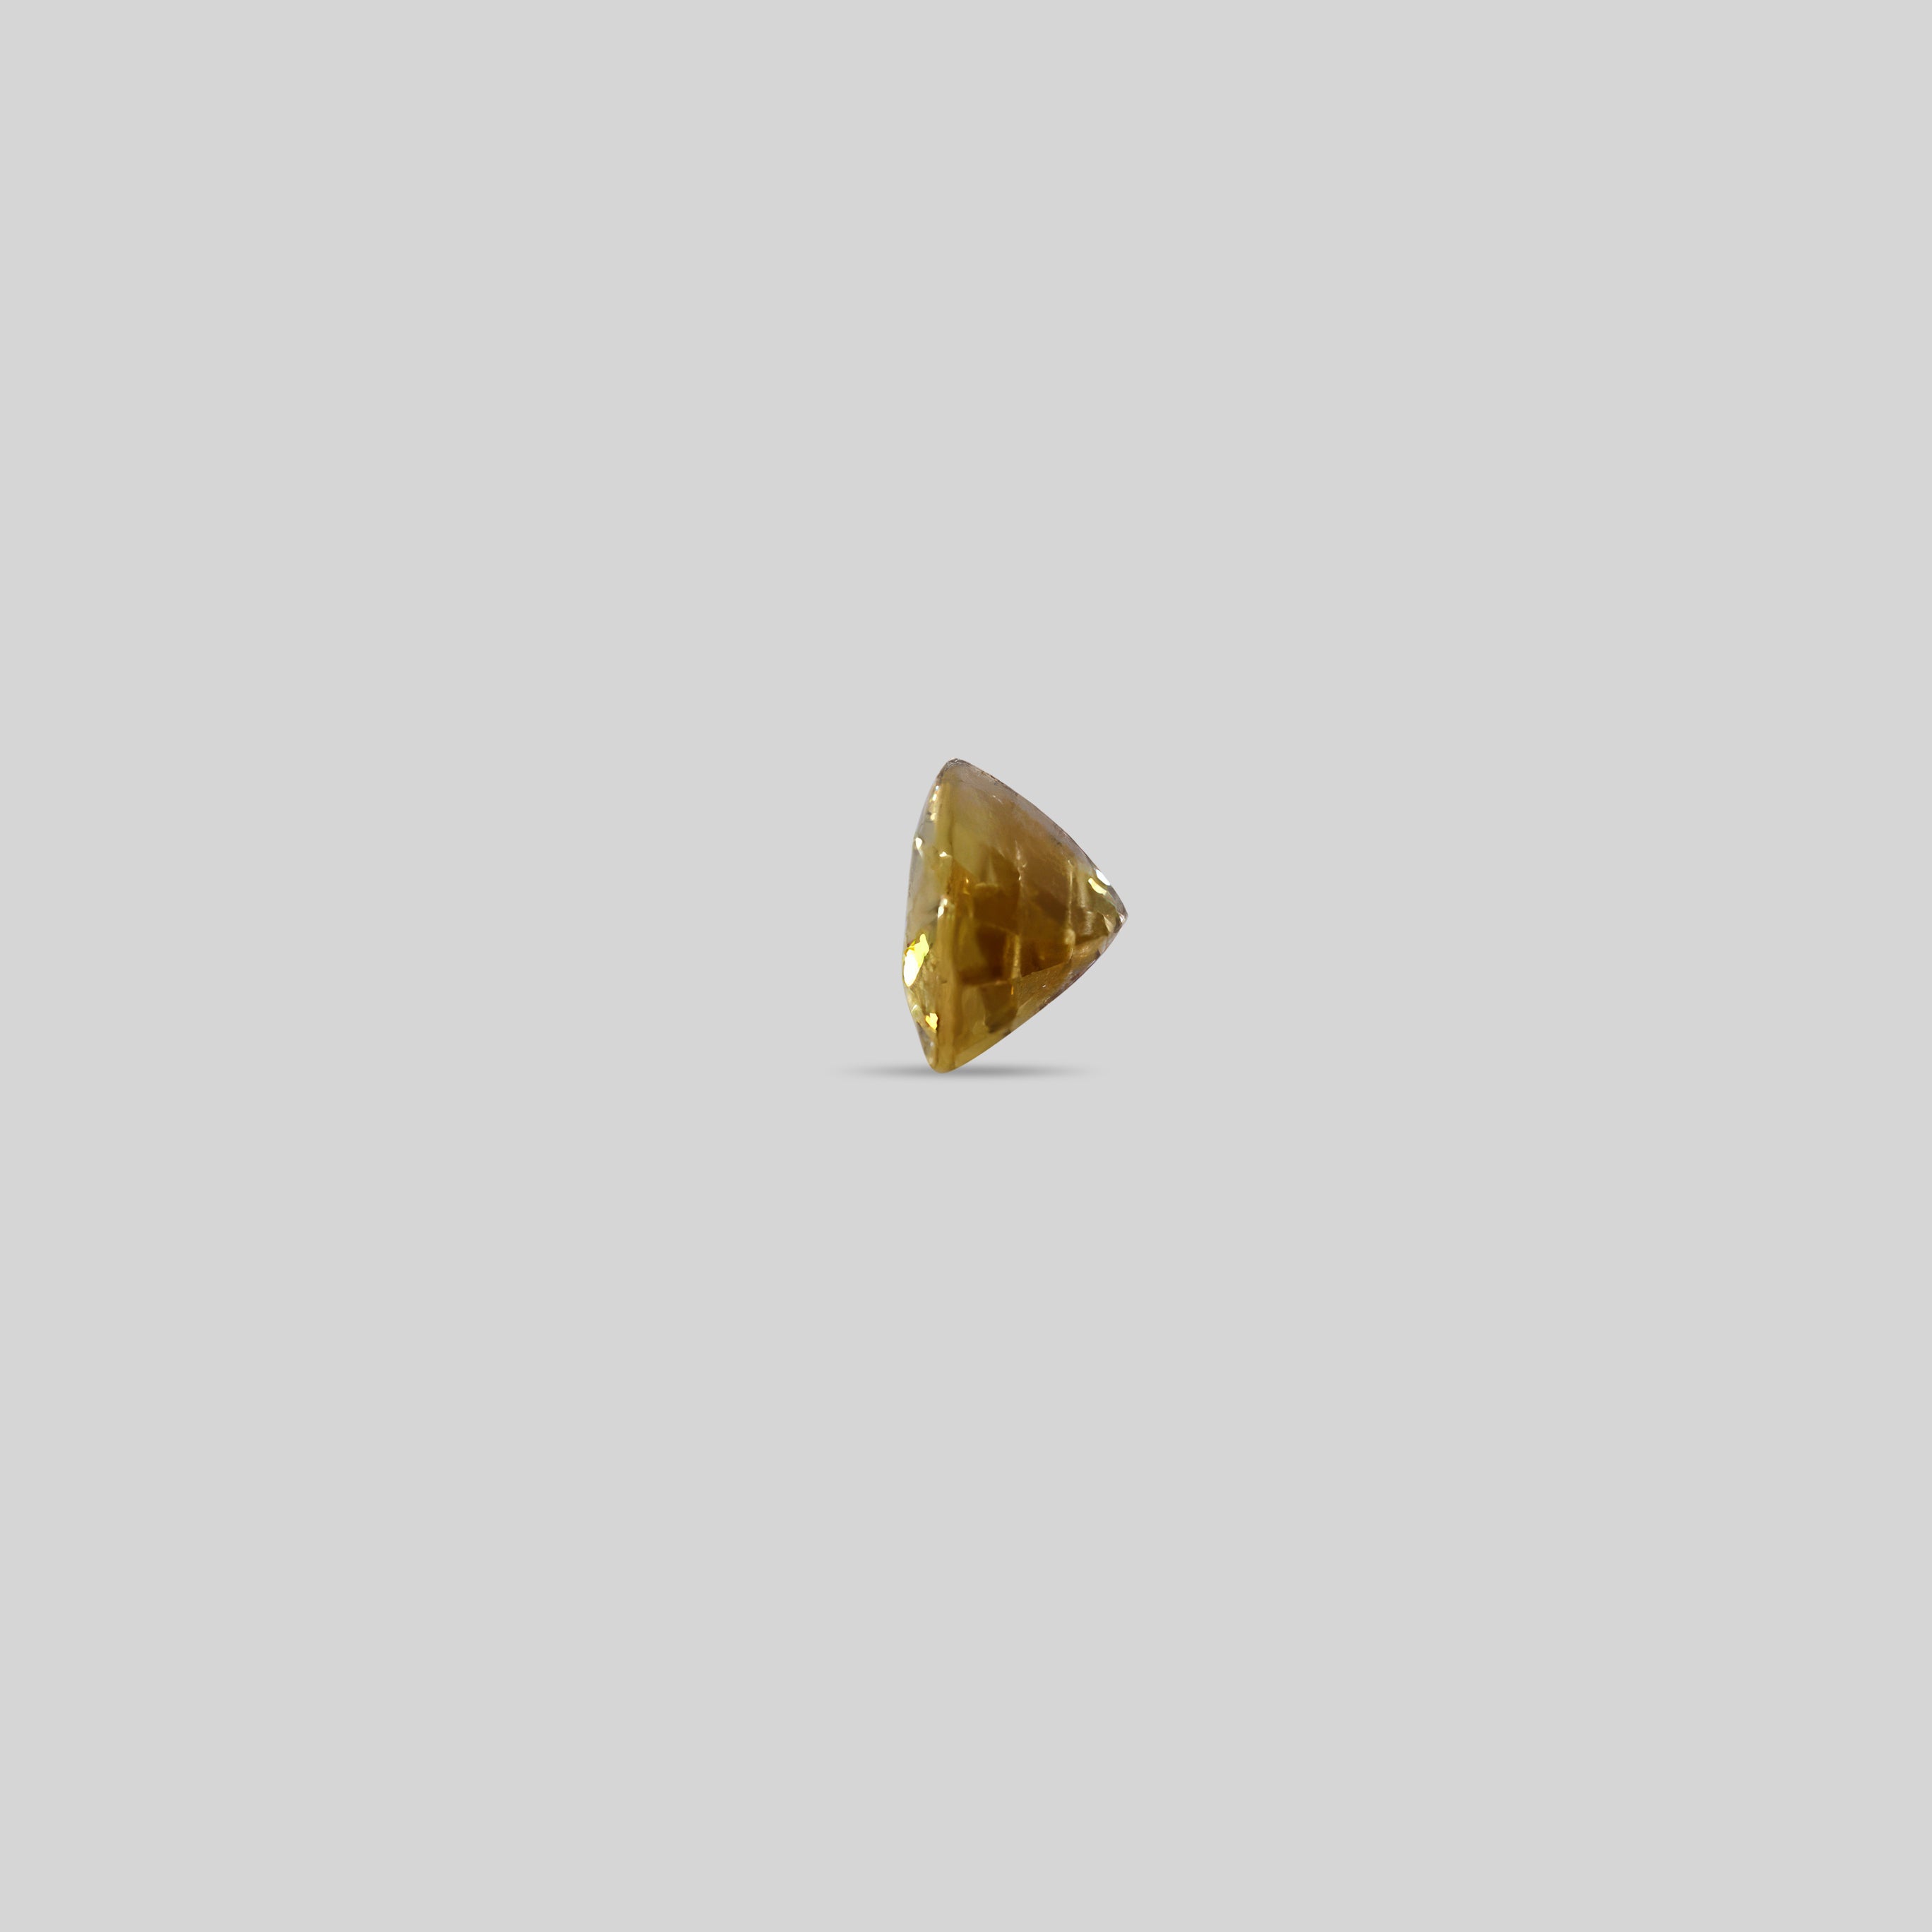 Side-View of a Yellow Zircon